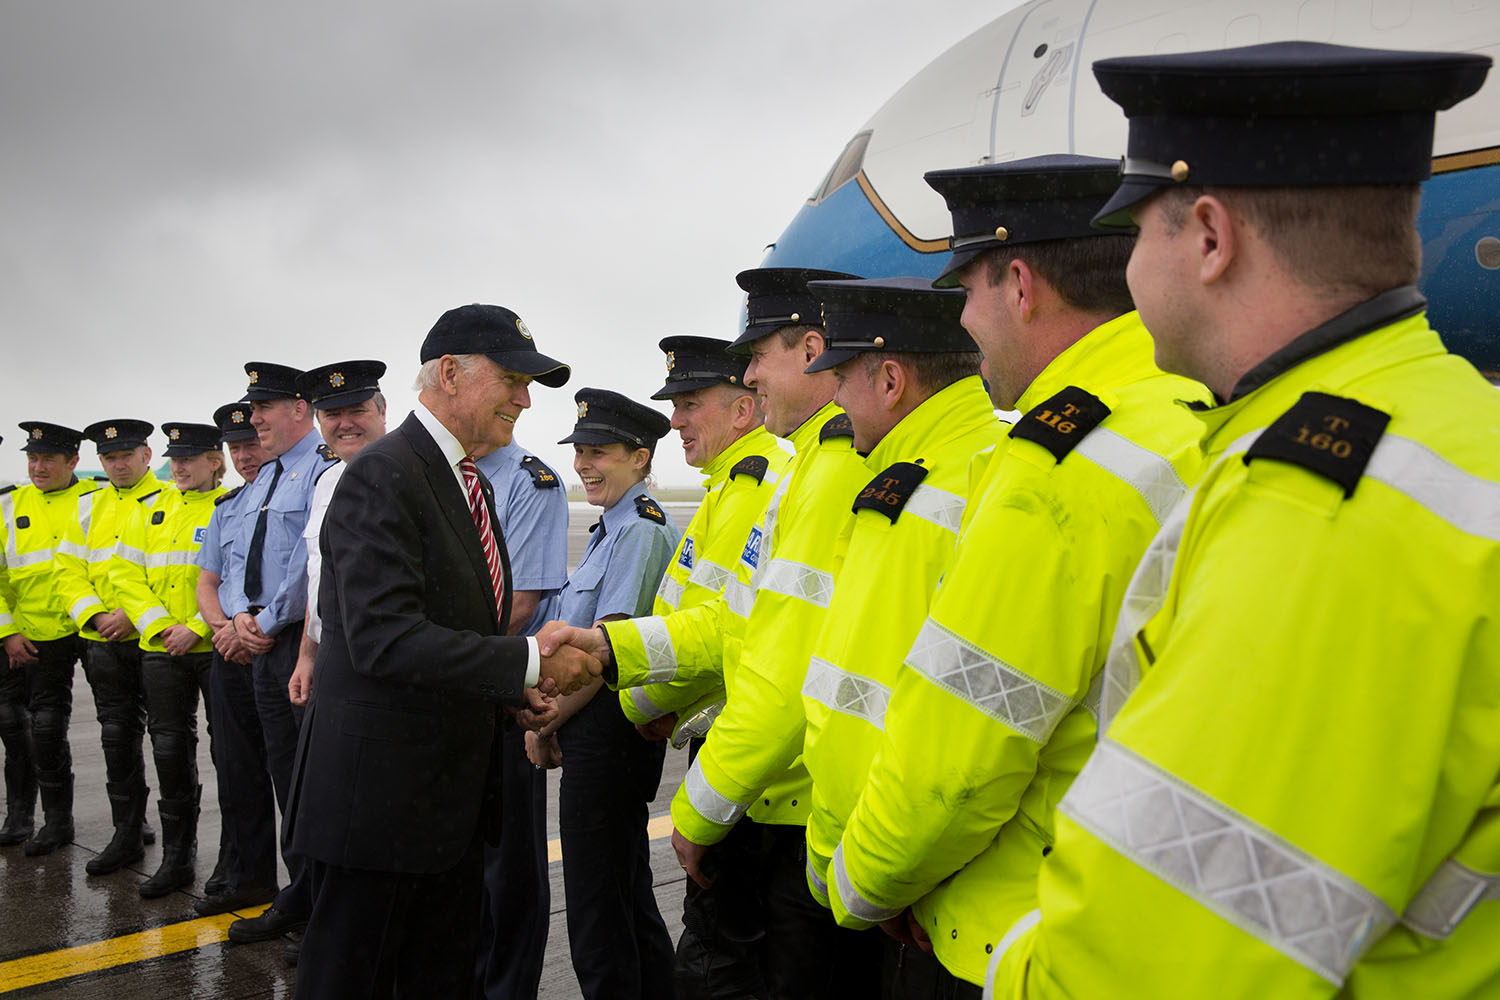 Vice President Joe Biden shakes hands with local law enforcement before boarding Air Force Two, at Dublin International Airport, in Dublin, Ireland, June 26, 2016. (Official White House Photo by David Lienemann)